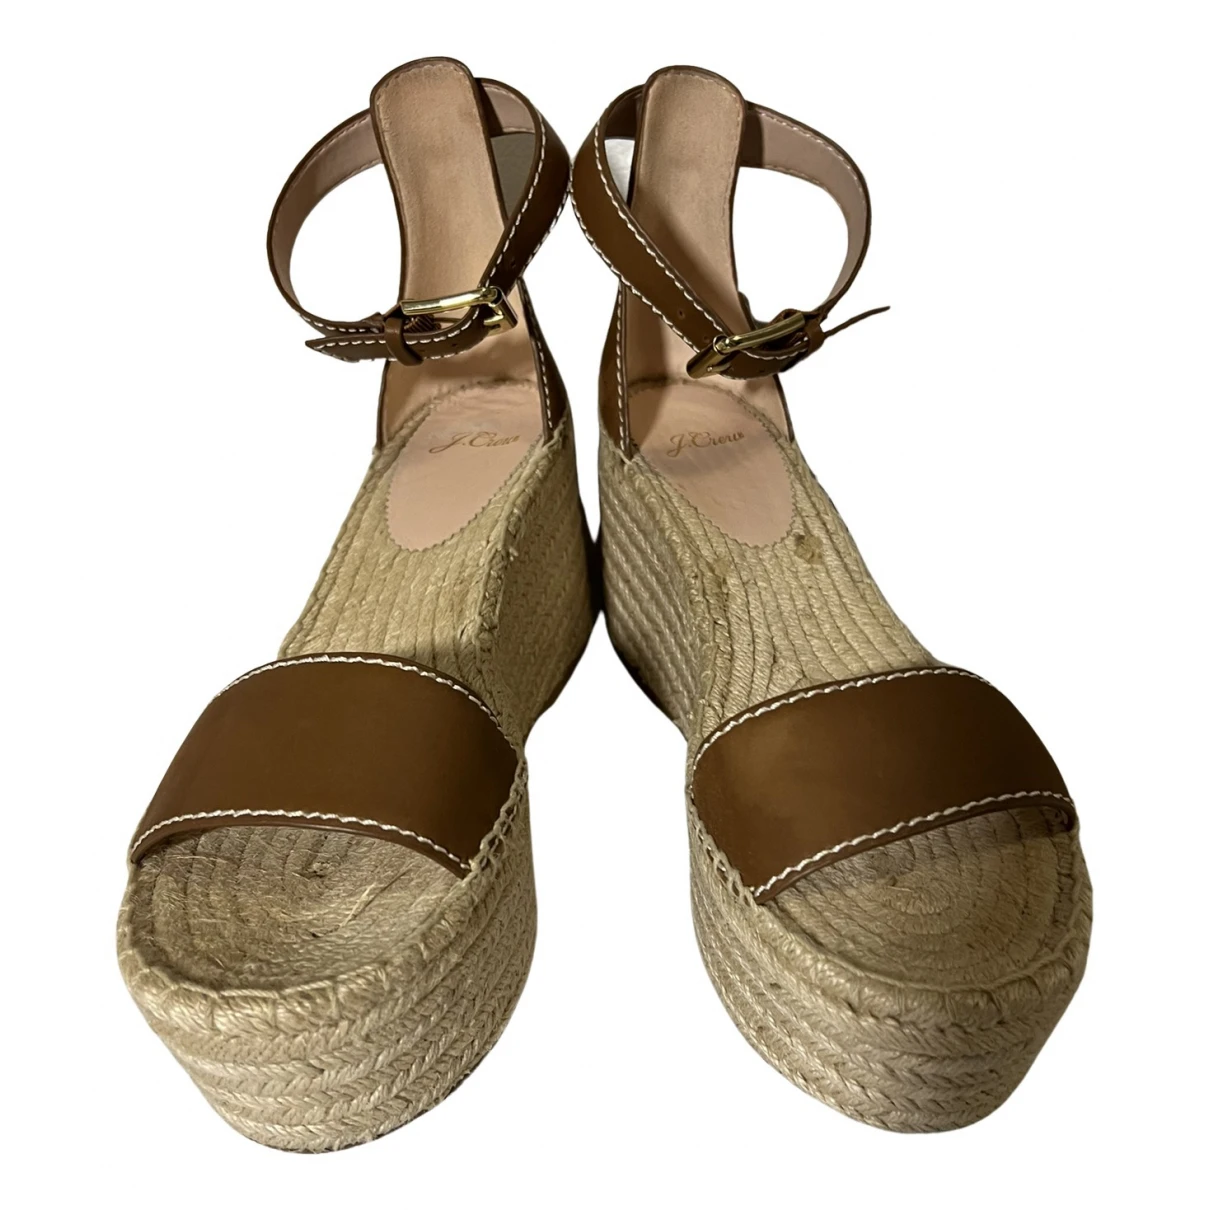 shoes J.Crew espadrilles for Female Leather 40 EU. Used condition